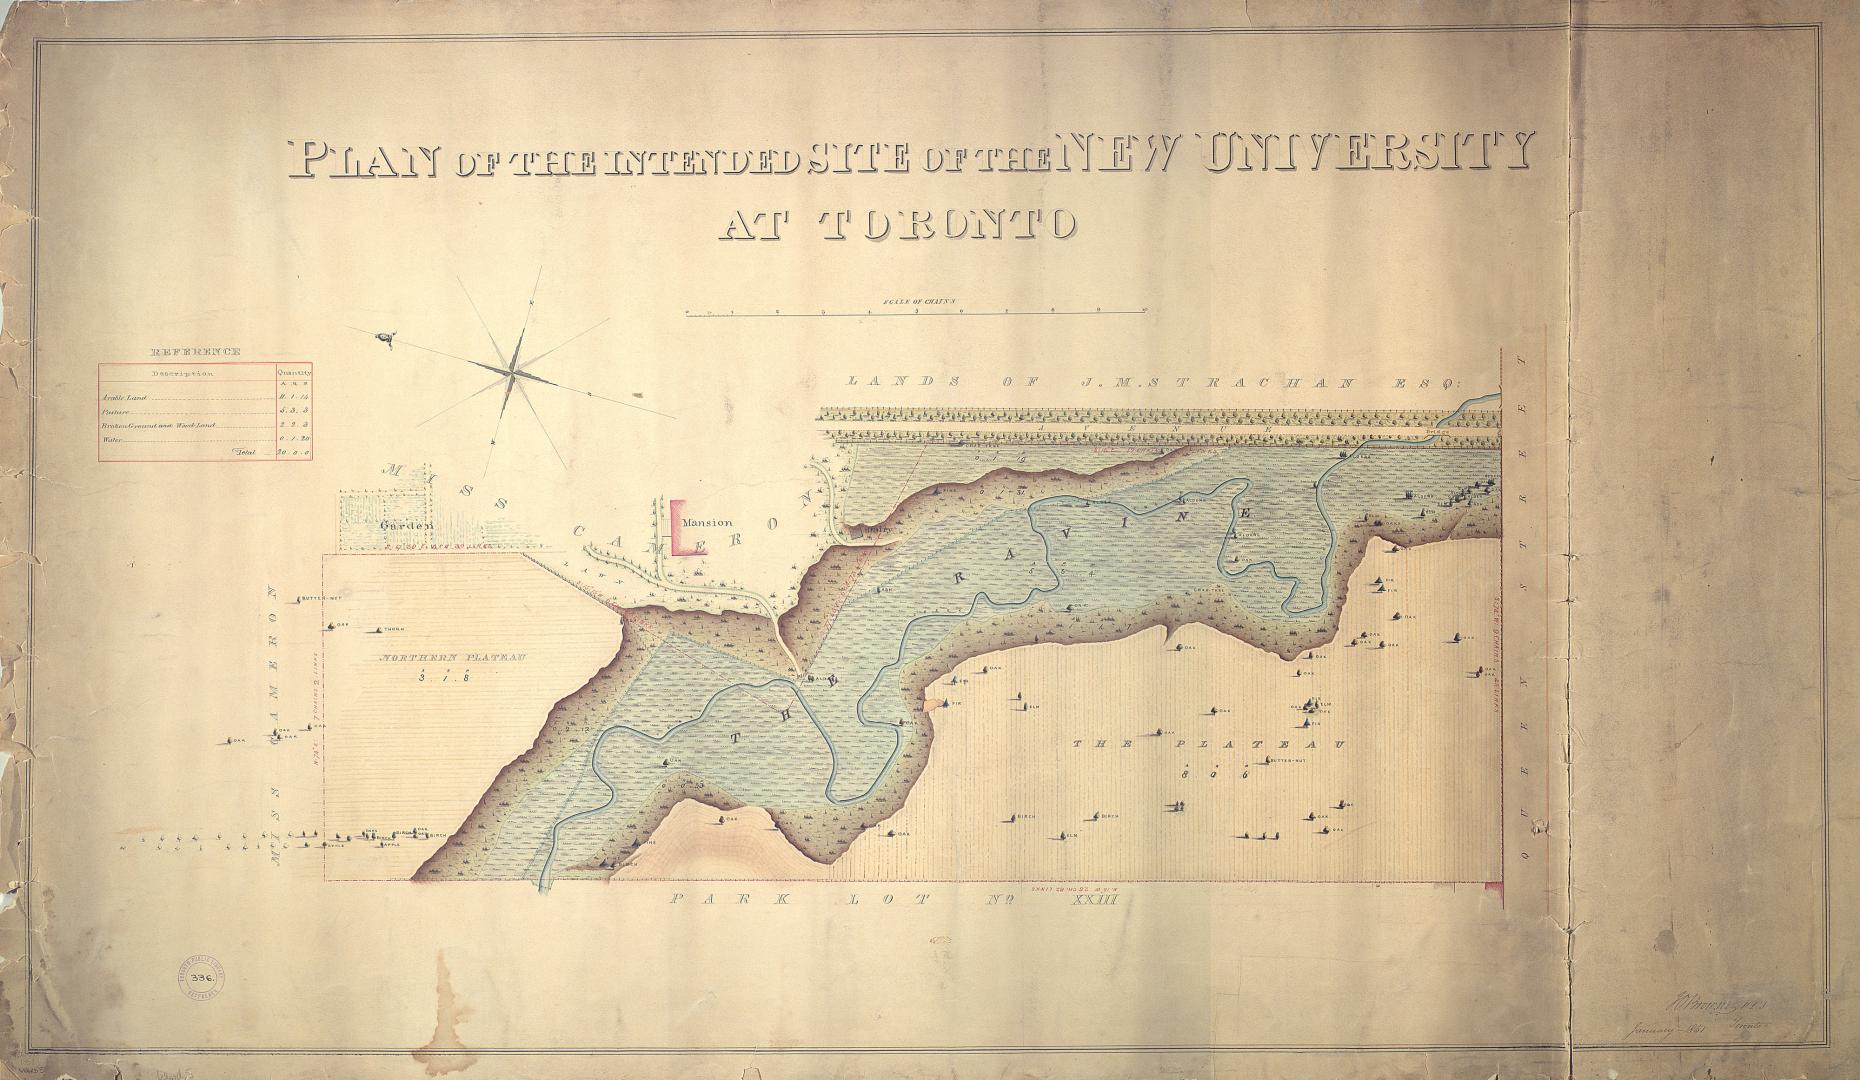 Plan of the intended site of the new university at Toronto.